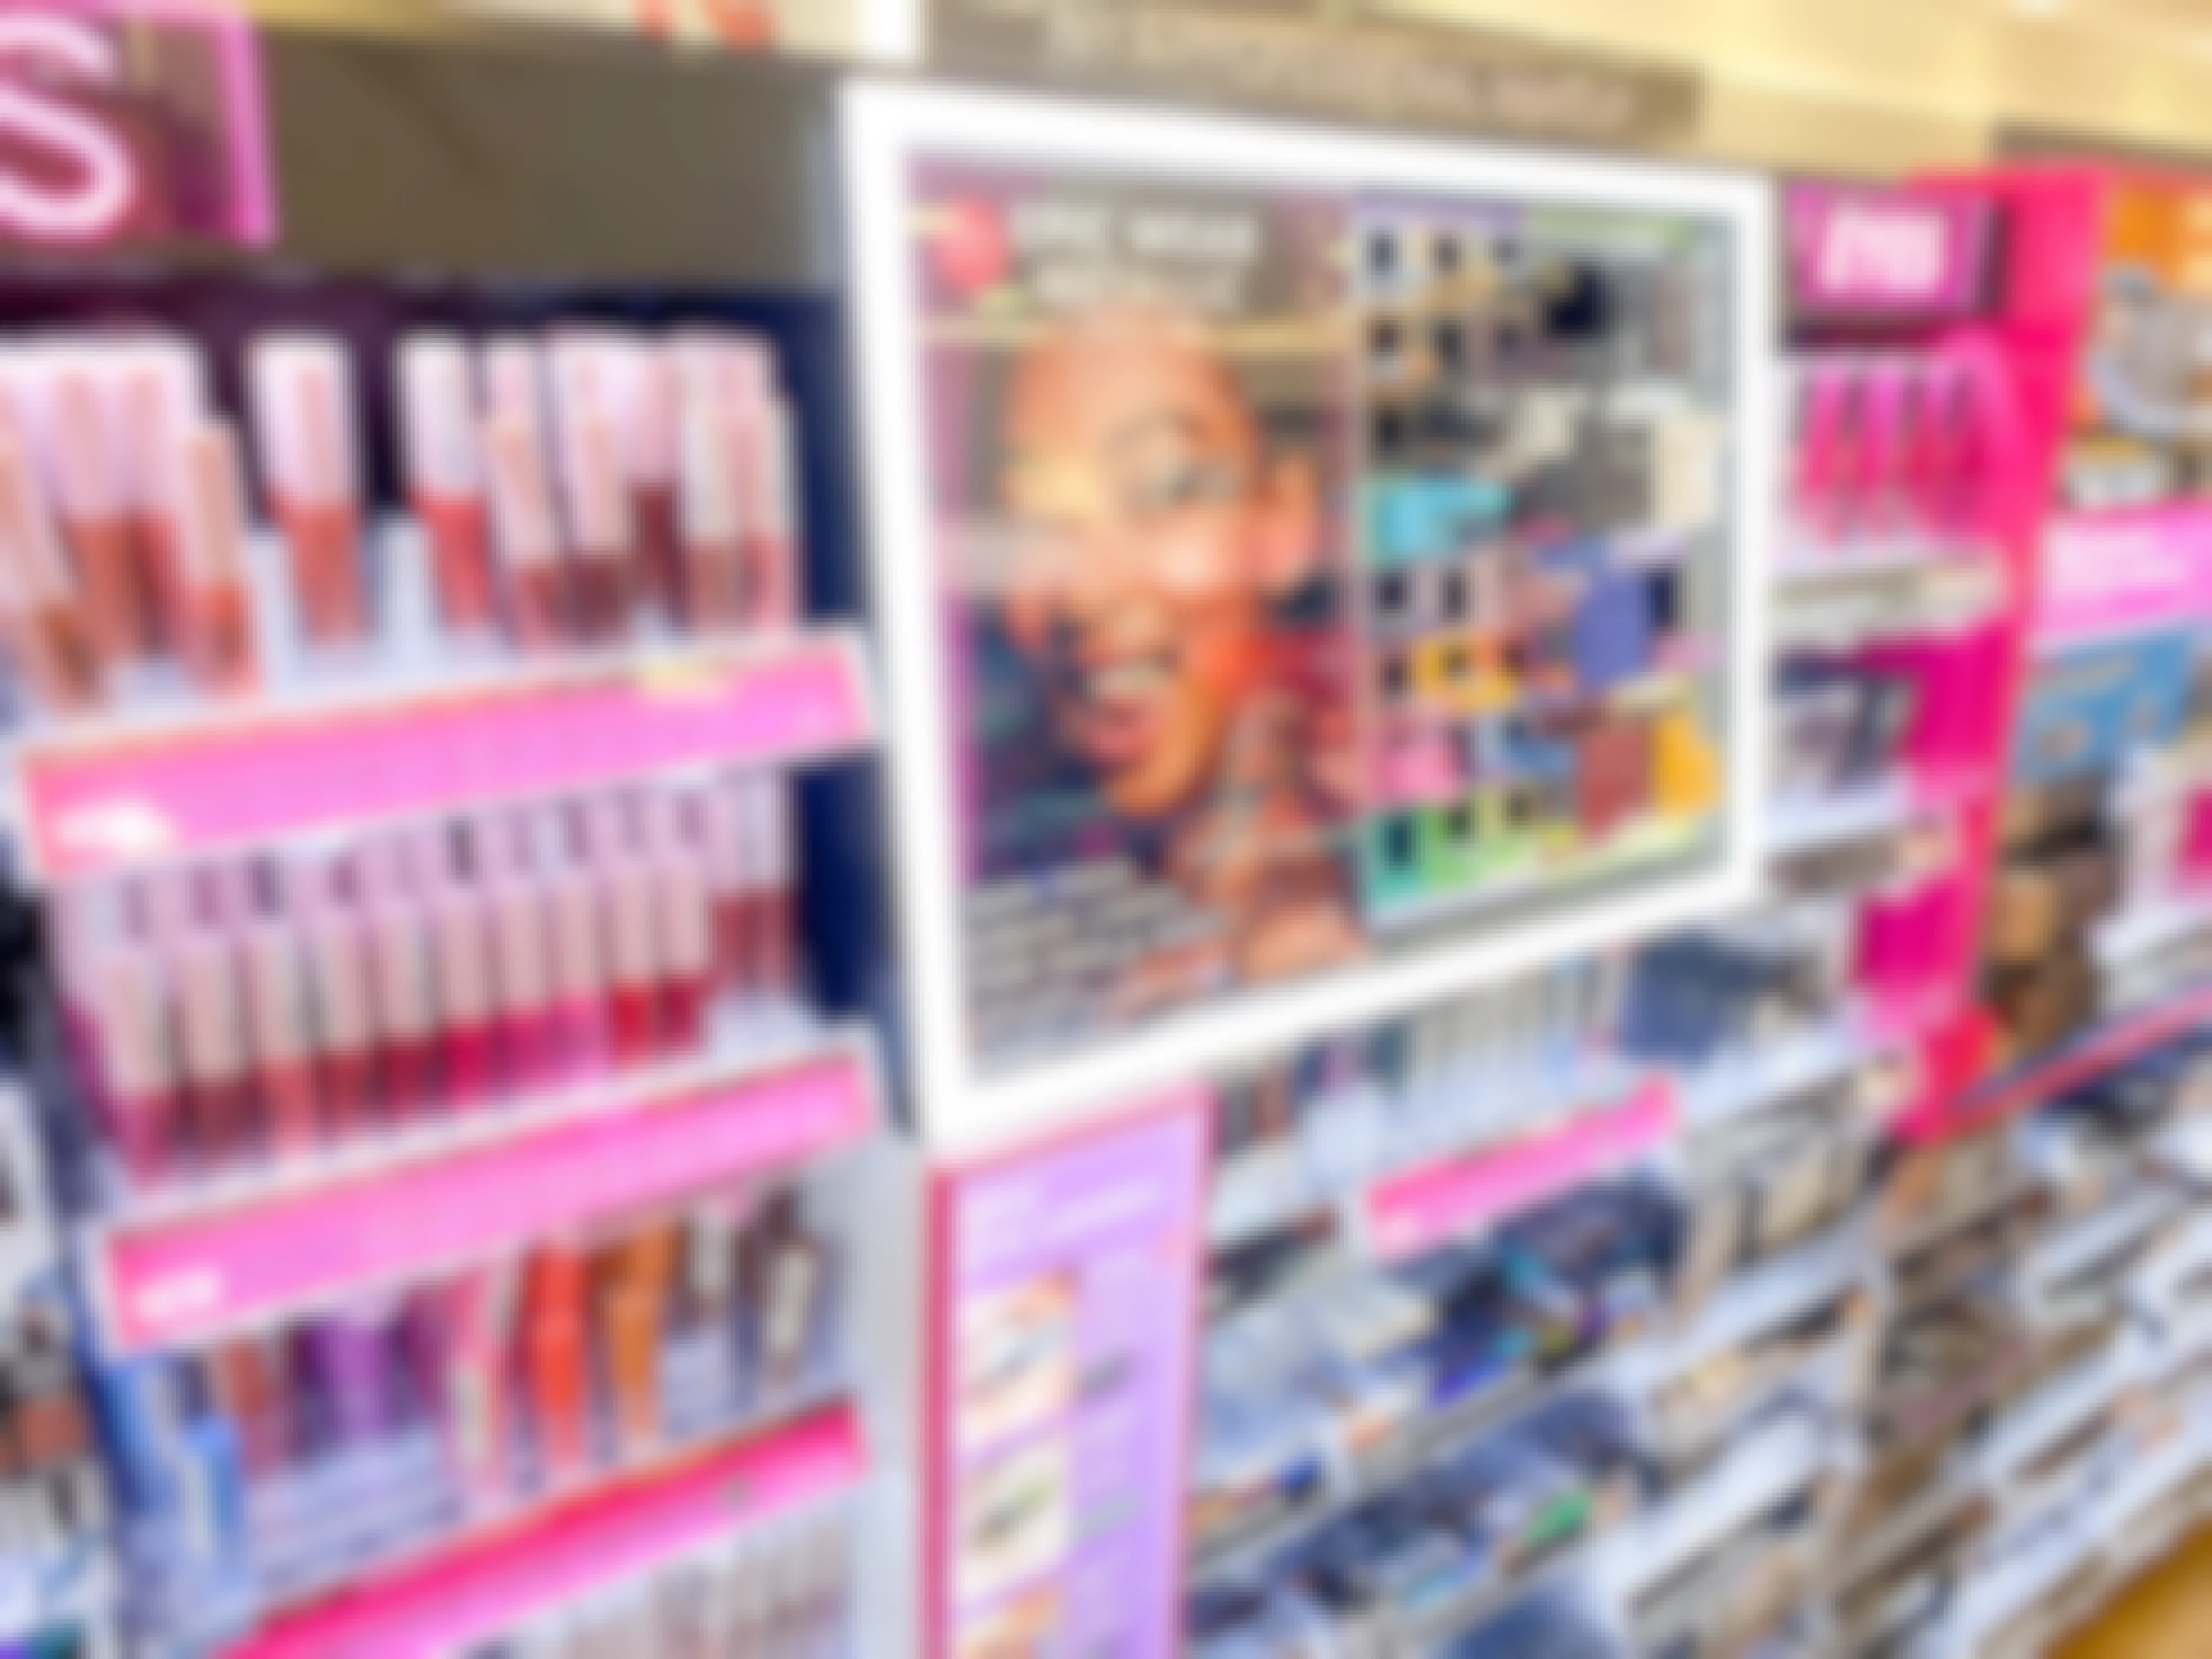 Get $82 Worth of NYX Products for $36.10 at Ulta — $15 Off $50+ Purchase